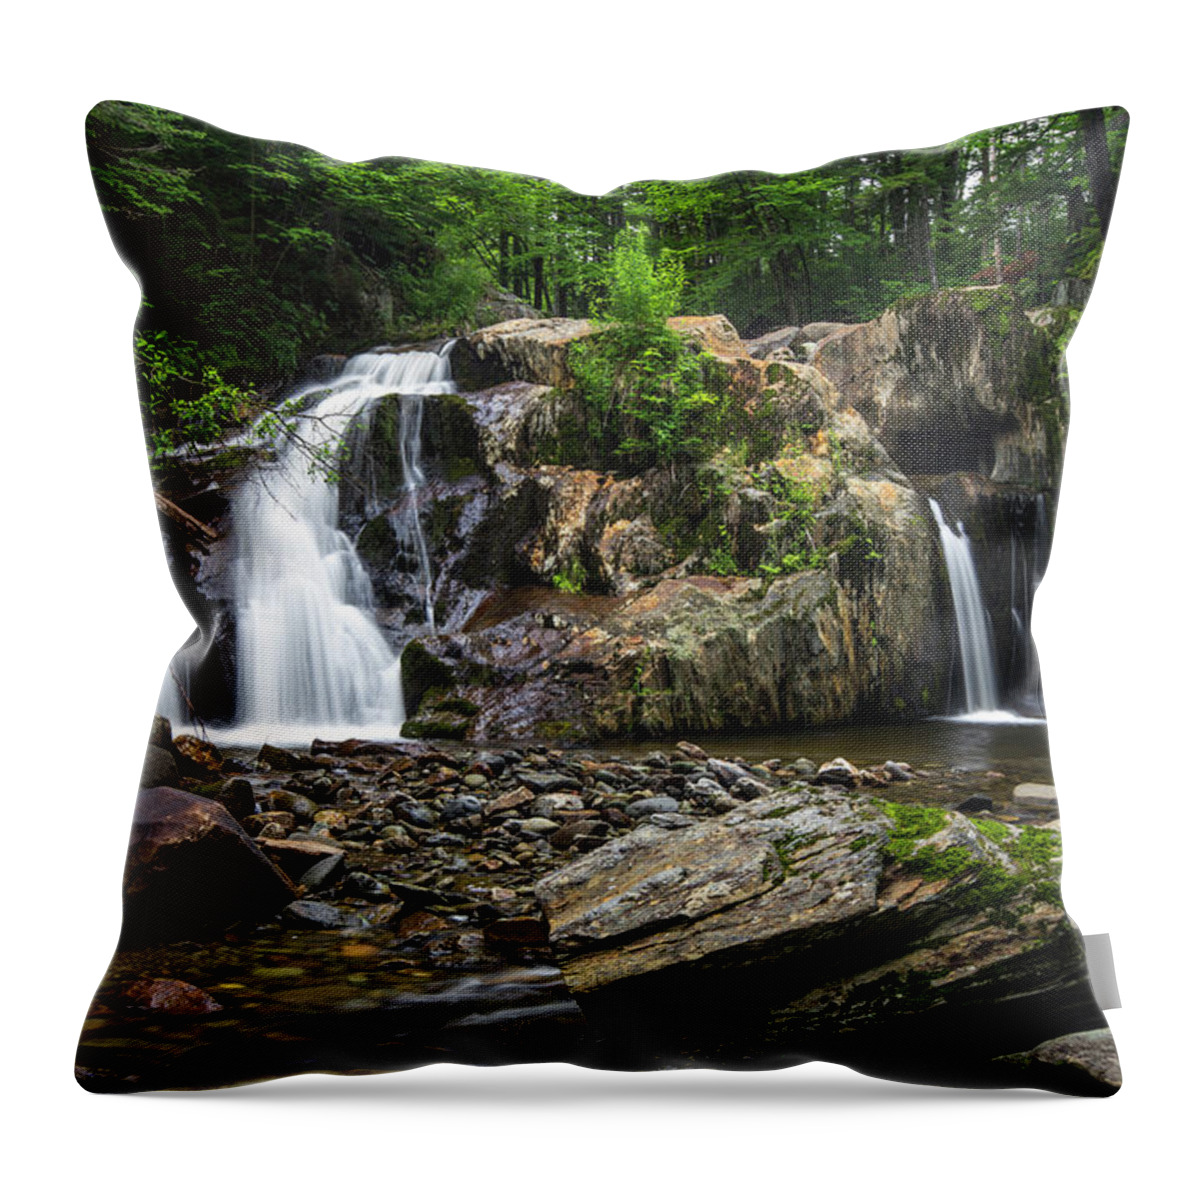 Roaring Throw Pillow featuring the photograph Roaring Brook Waterfall by White Mountain Images